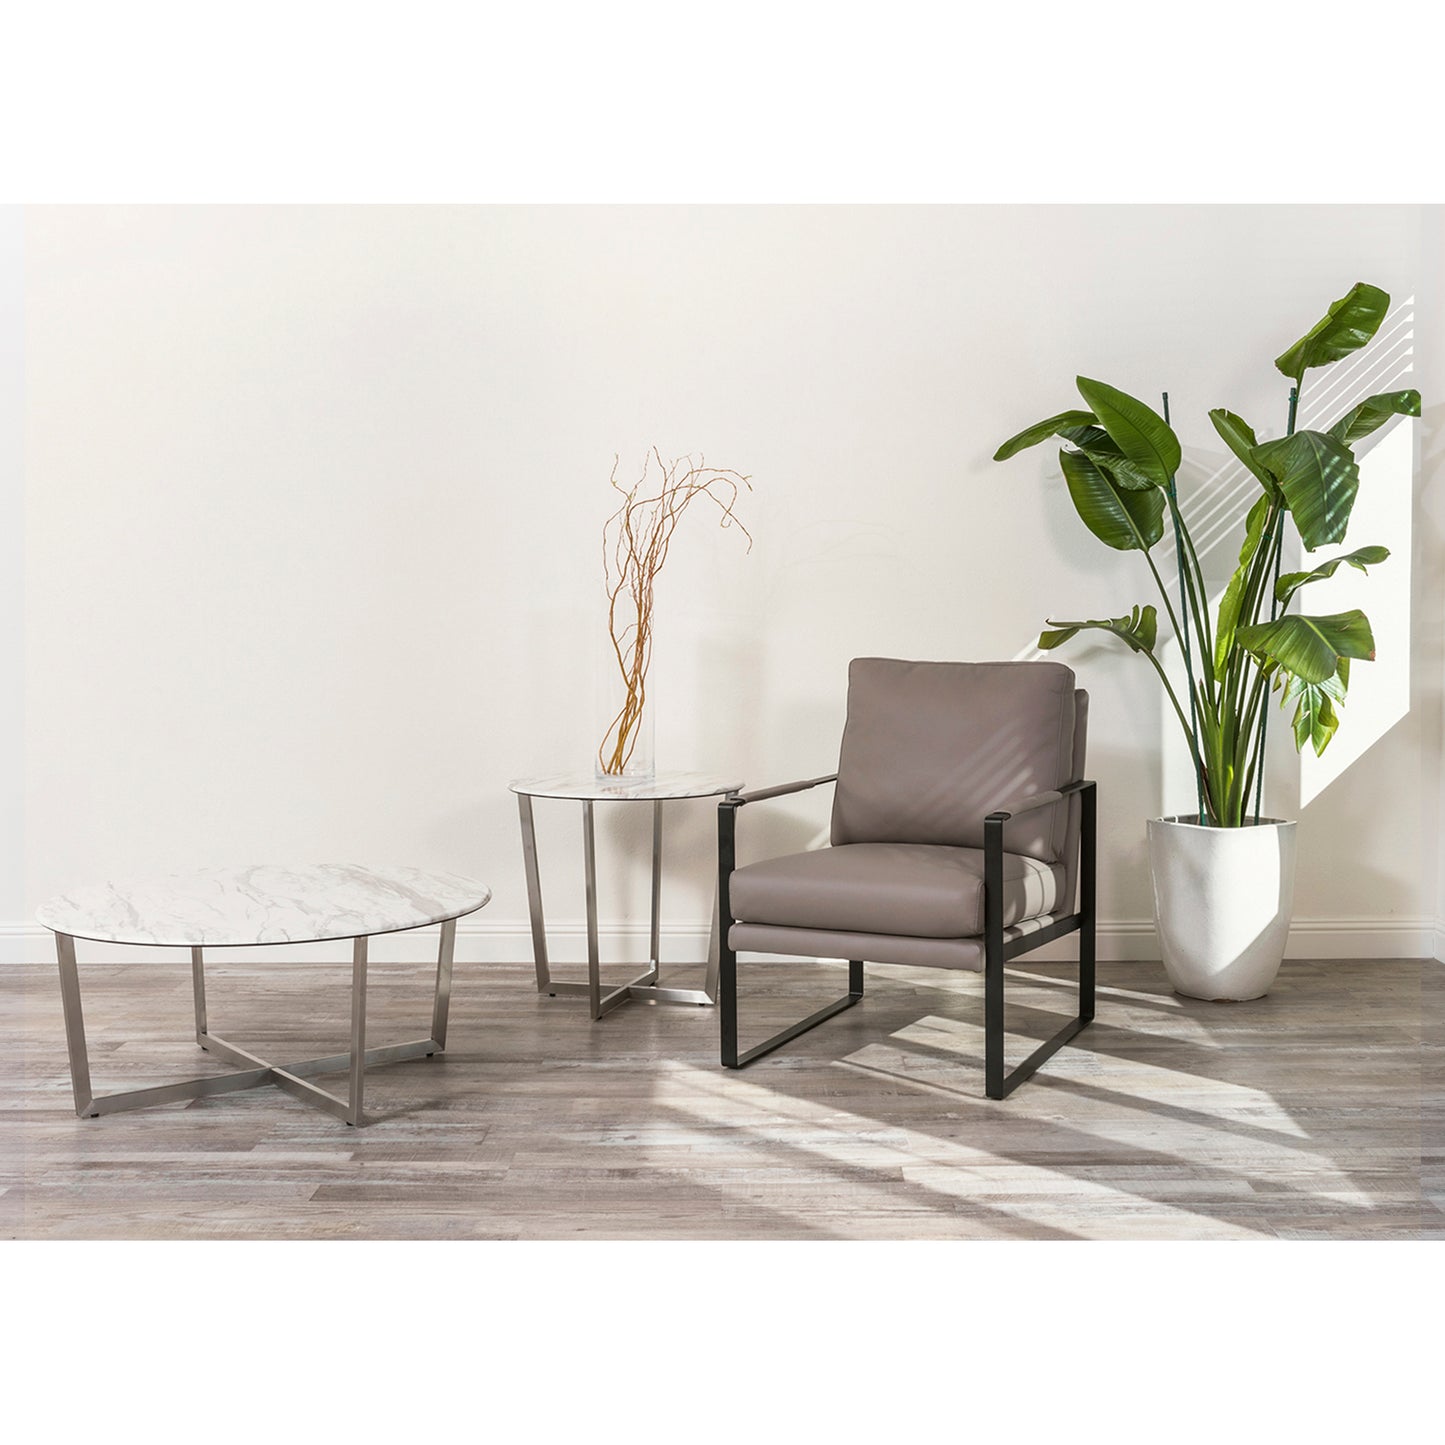 Load image into Gallery viewer, Bettina Lounge Chair Lounge Chair Eurostyle     Four Hands, Mid Century Modern Furniture, Old Bones Furniture Company, Old Bones Co, Modern Mid Century, Designer Furniture, https://www.oldbonesco.com/
